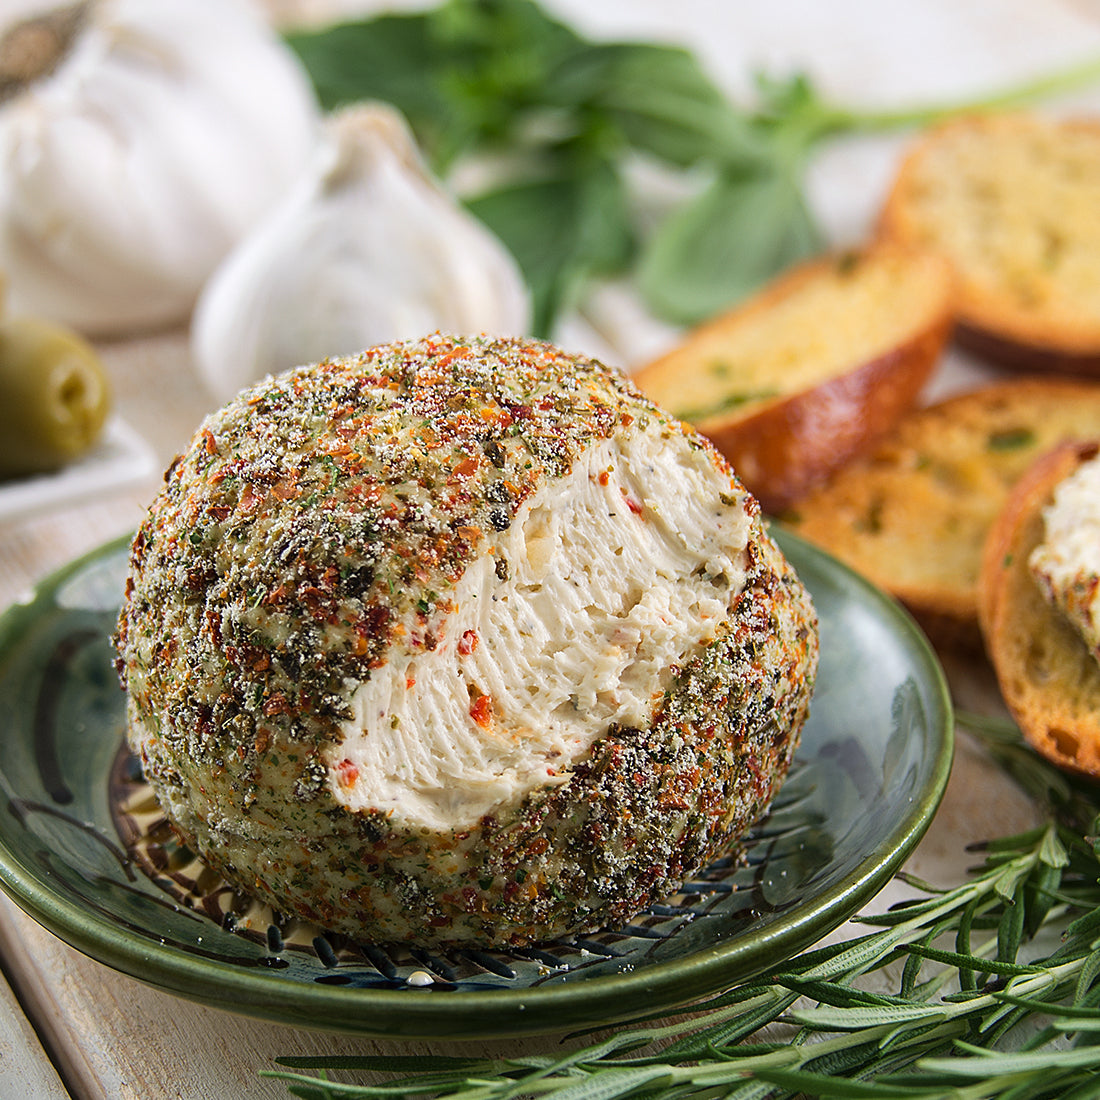 A Tuscan Herb Cheeseball on a green plate next to garlic, bread, olives, and fresh herbs.